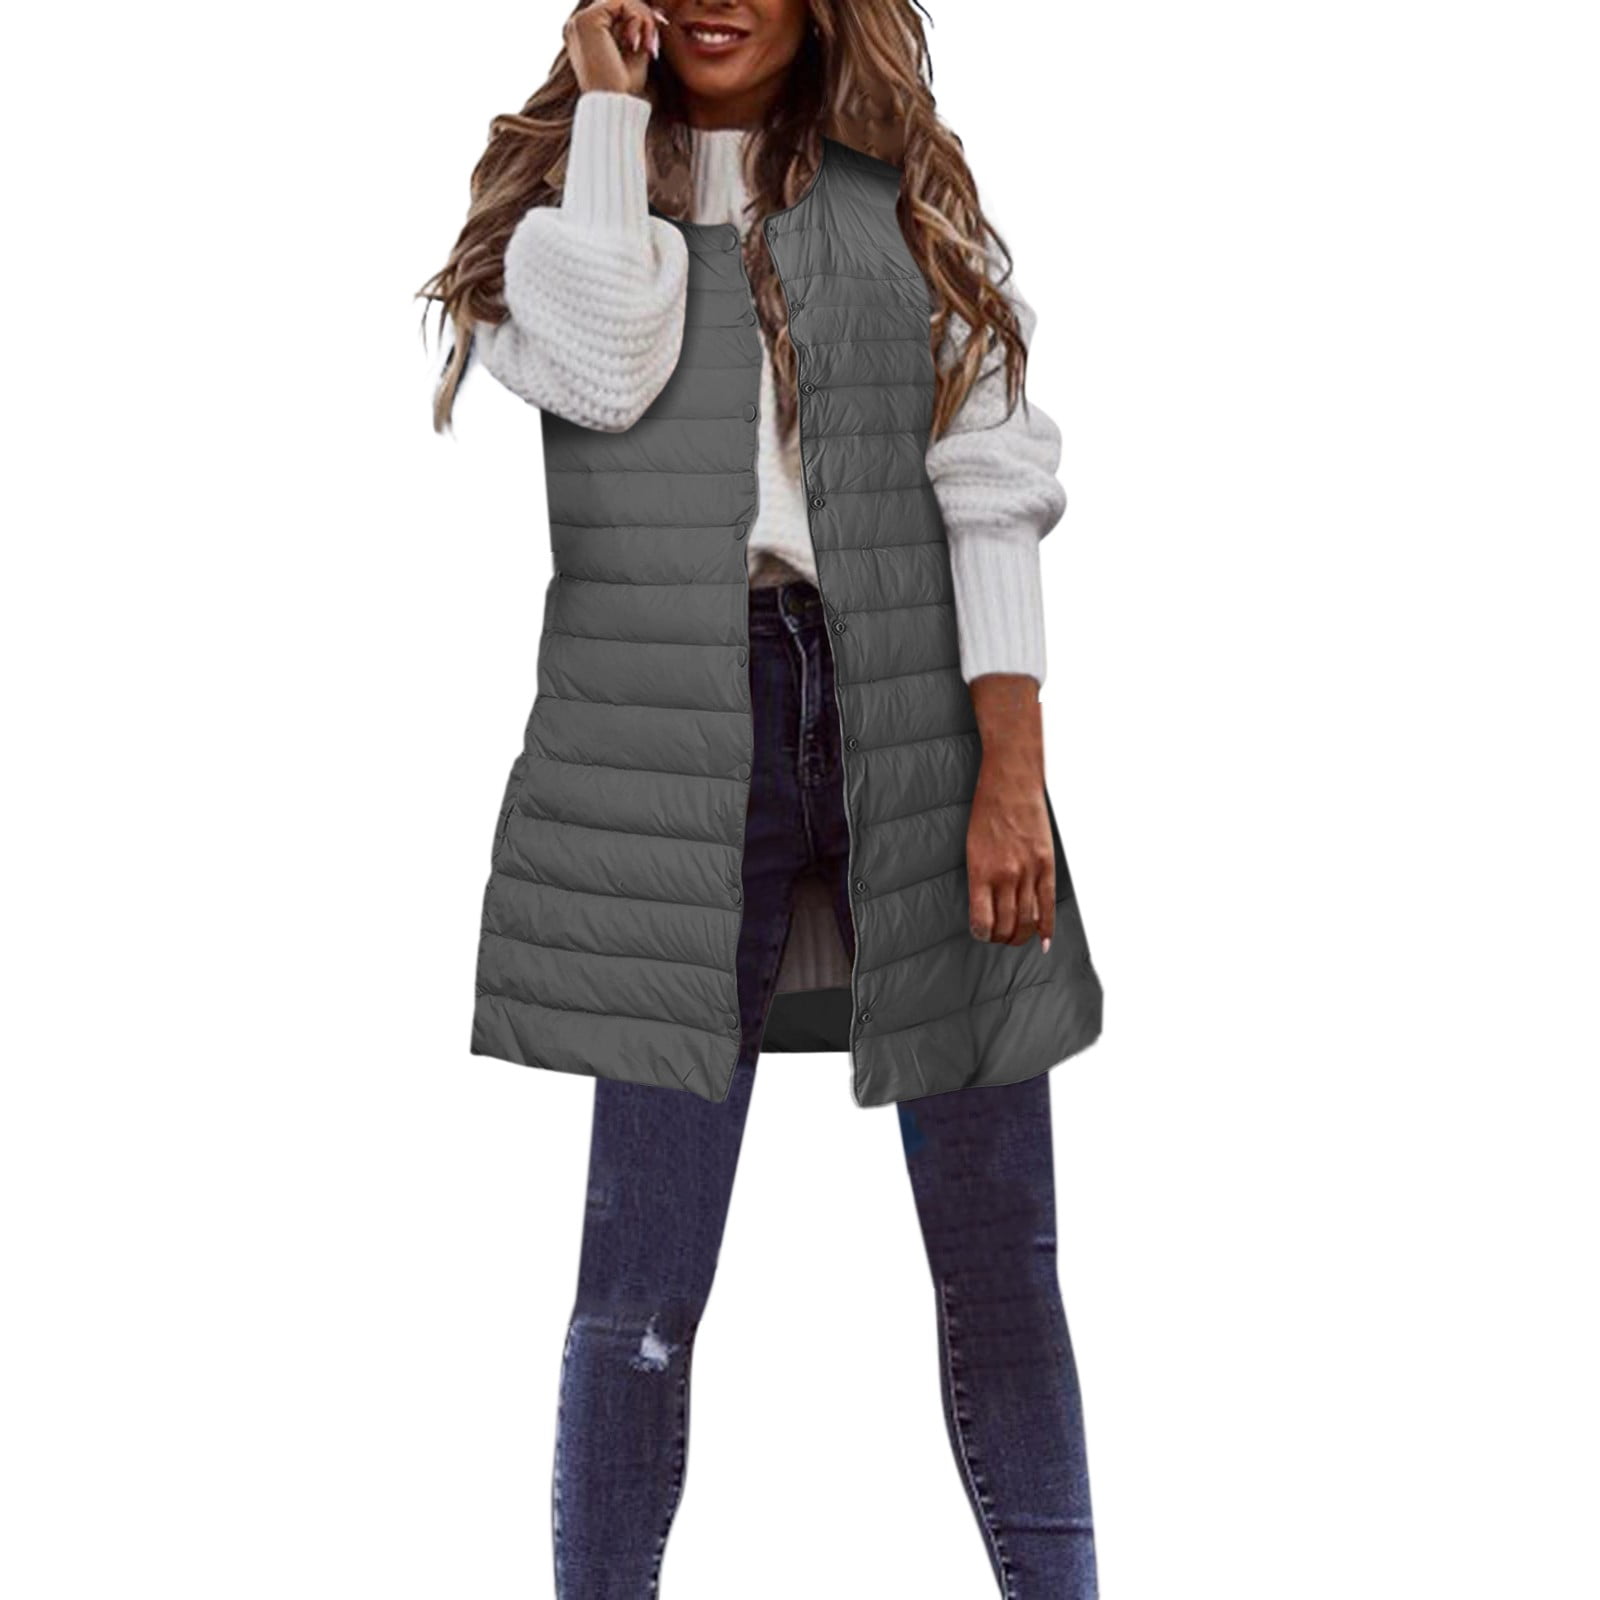 Women's Winter Vest Thin And Light Down Casual Coat Slim Gilet Quilted Jacket Outdoor Winter Coat Vest With Pockets plus Size Coats for Women 4x-5x - Walmart.com